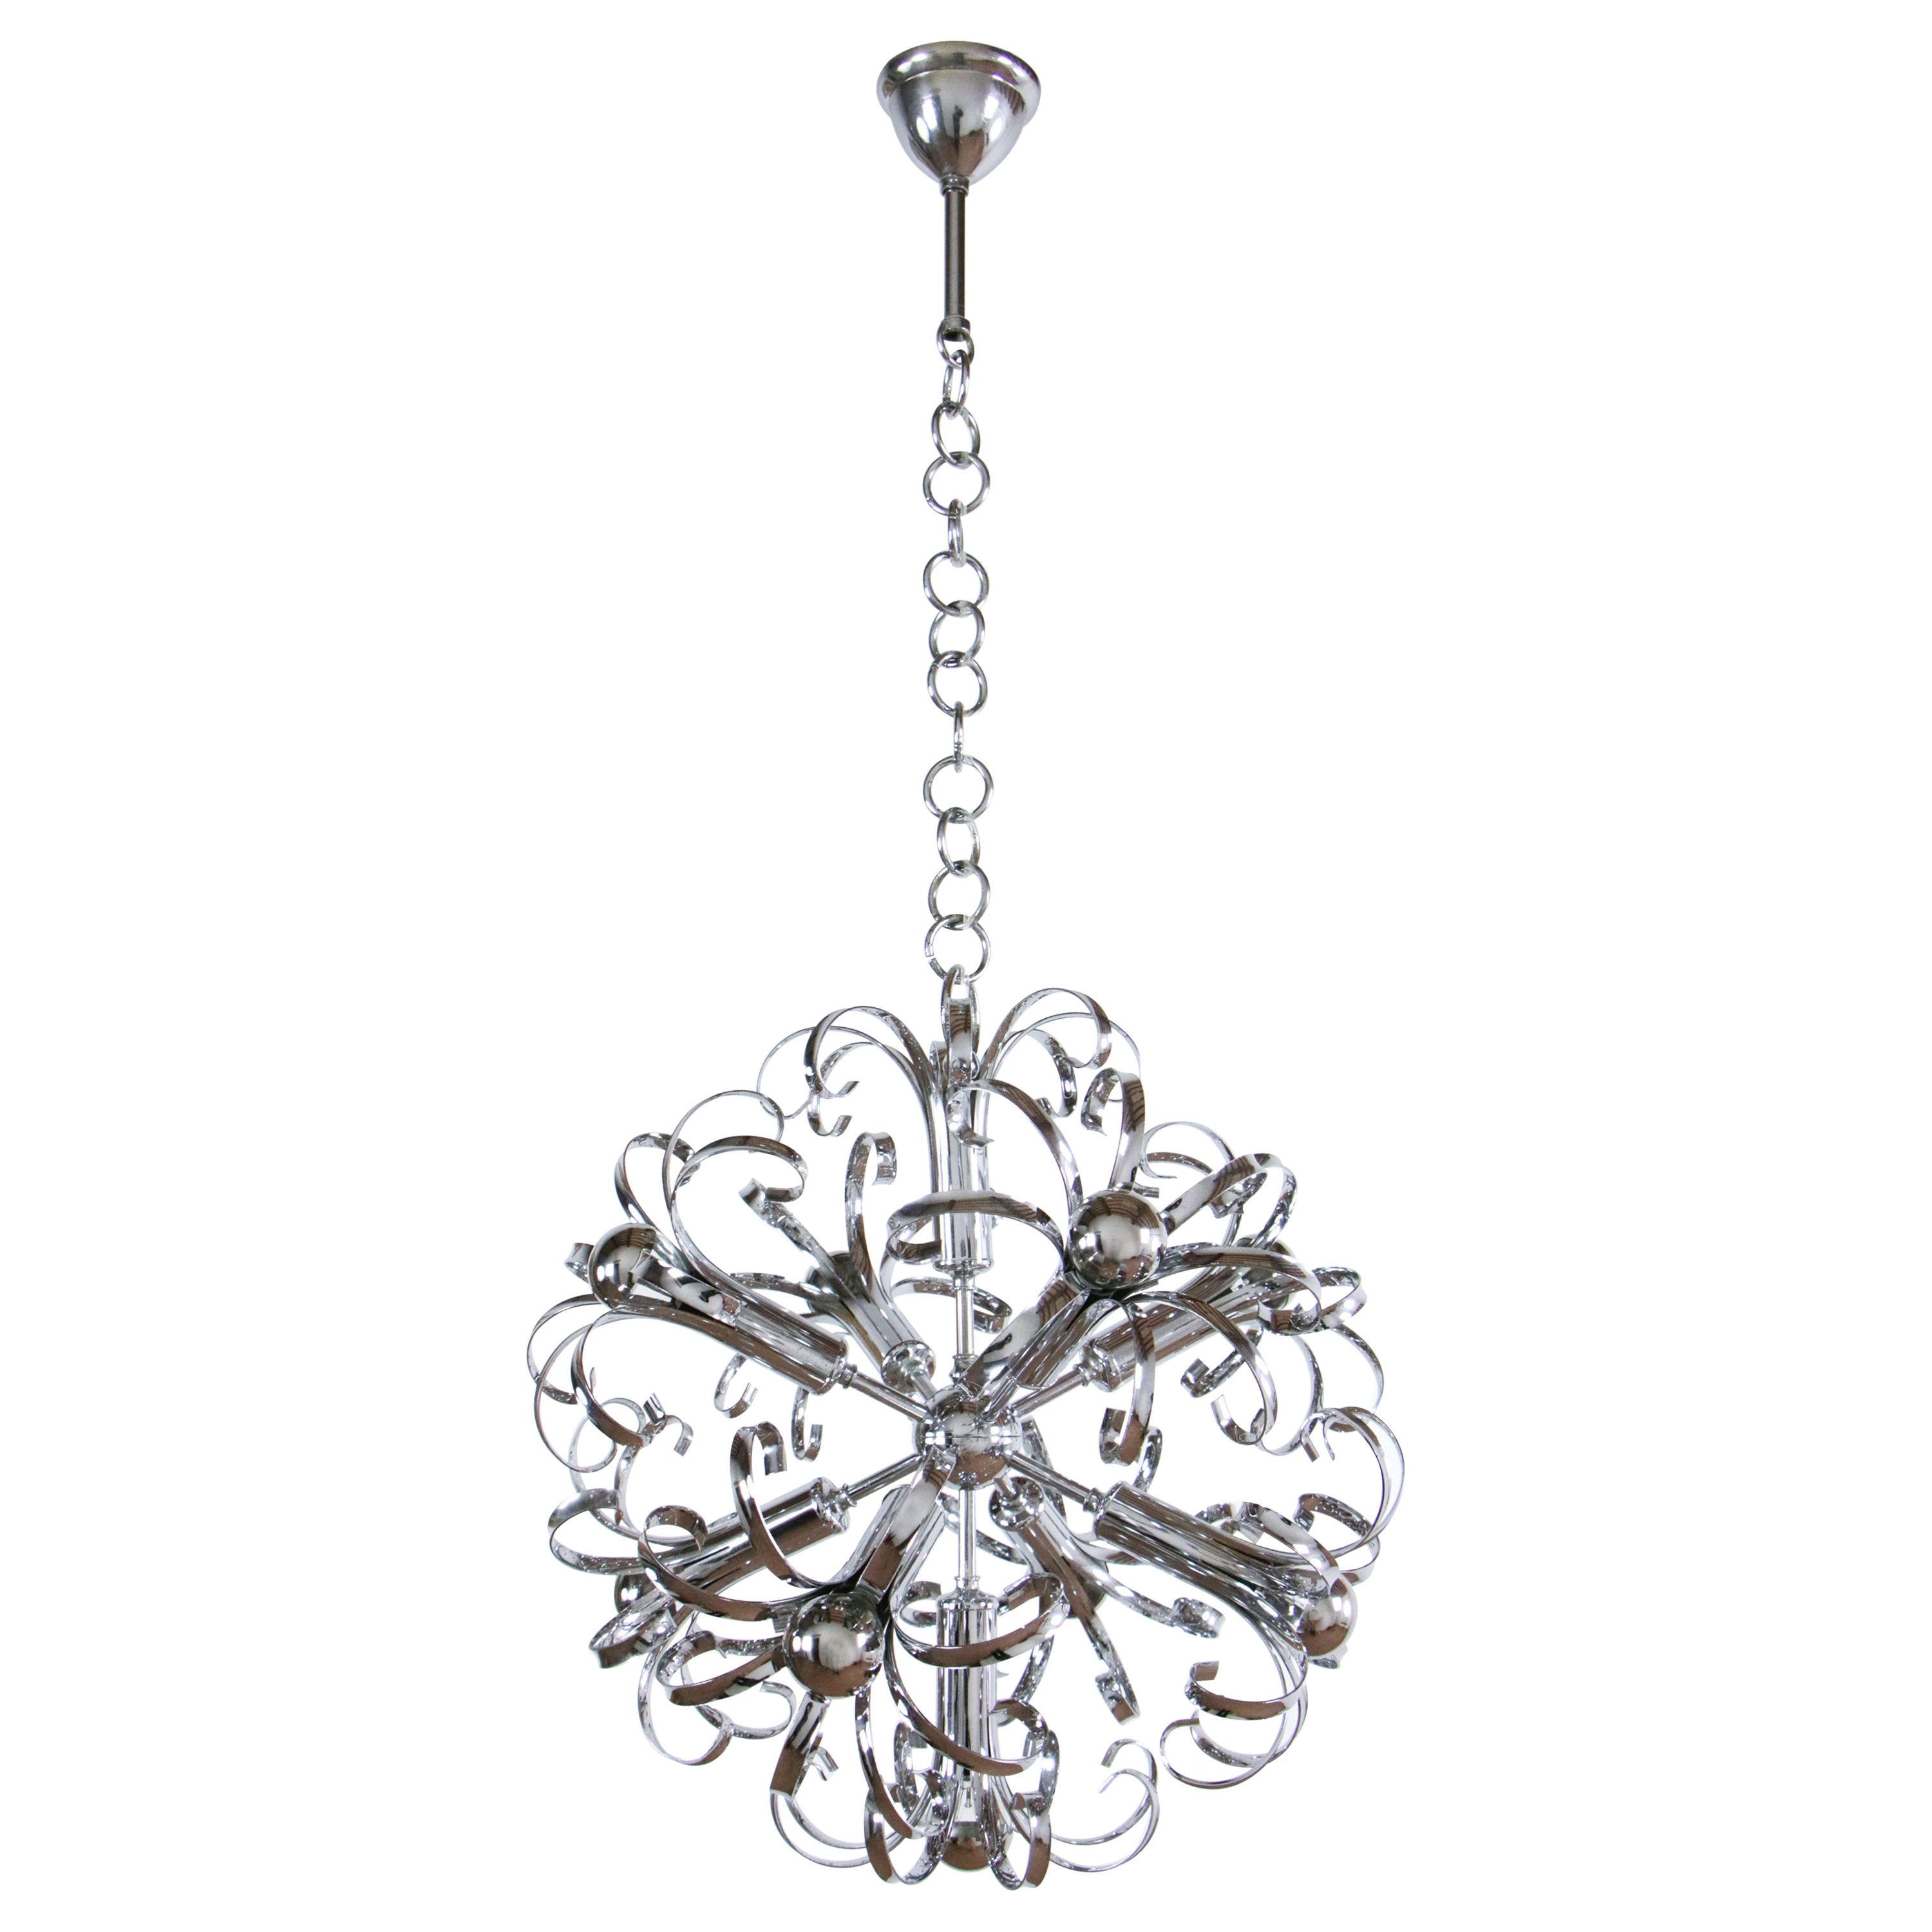 Beautiful Italian chrome Sputnik chandelier with chromed brass, 9 lights E14 format. It has a very refined design of great decorative impact reminiscent of the Space Age. The piece has been subjected to a careful restoration that has brought it back